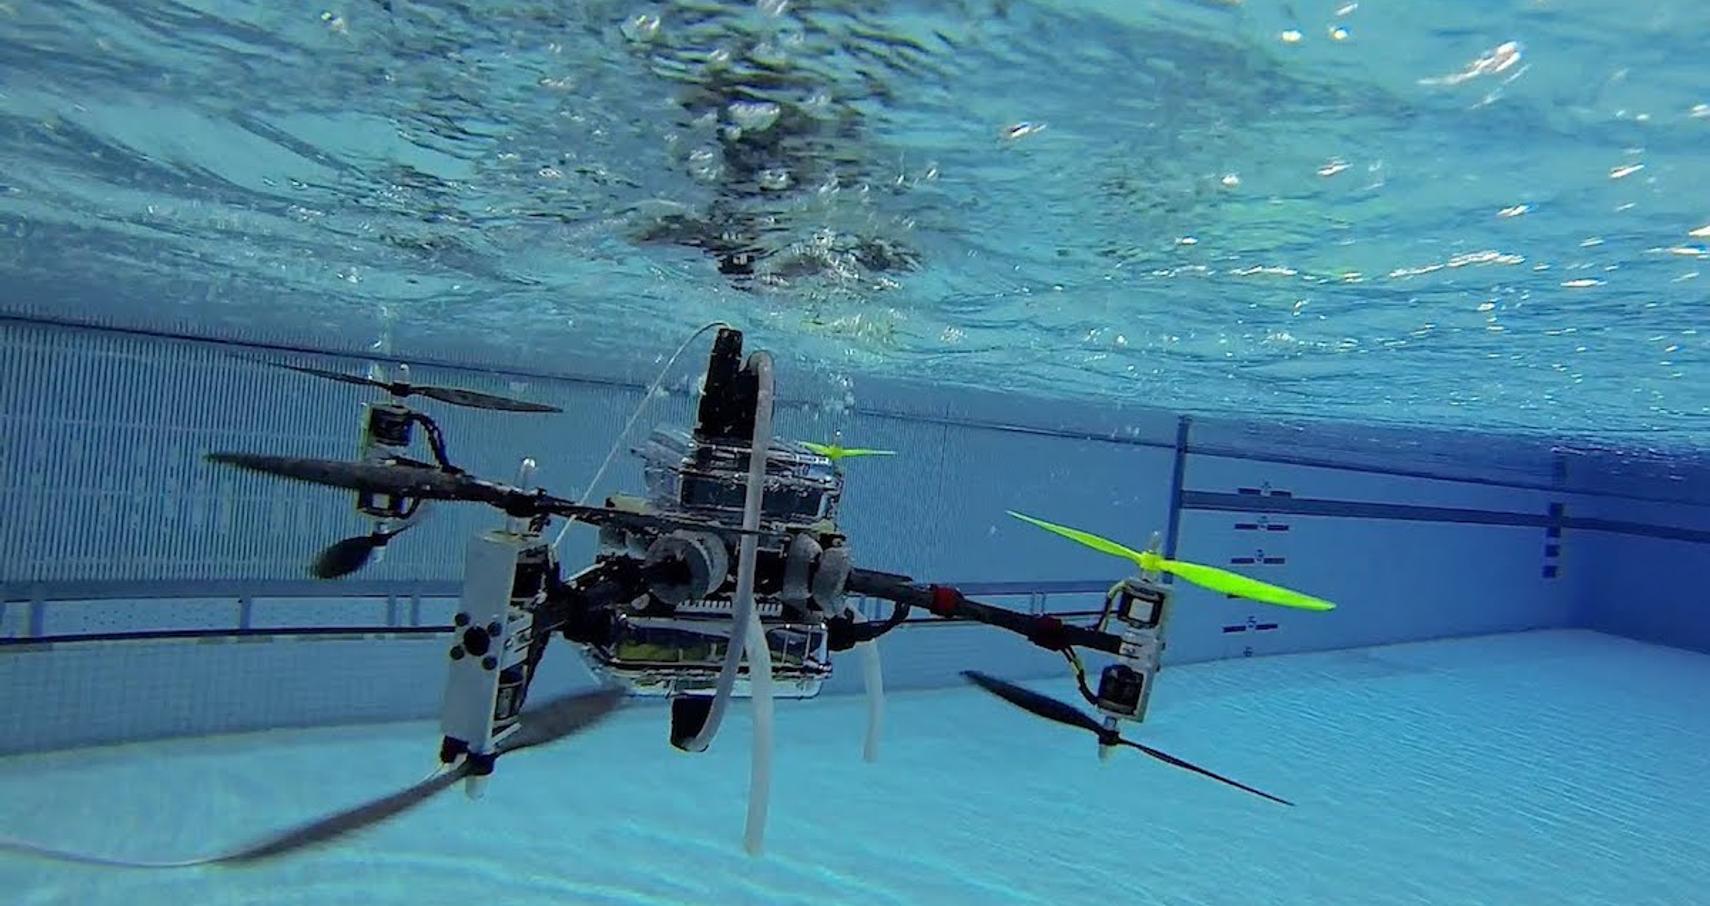 8 Best Underwater Drones for Sale [2021] - With Camera